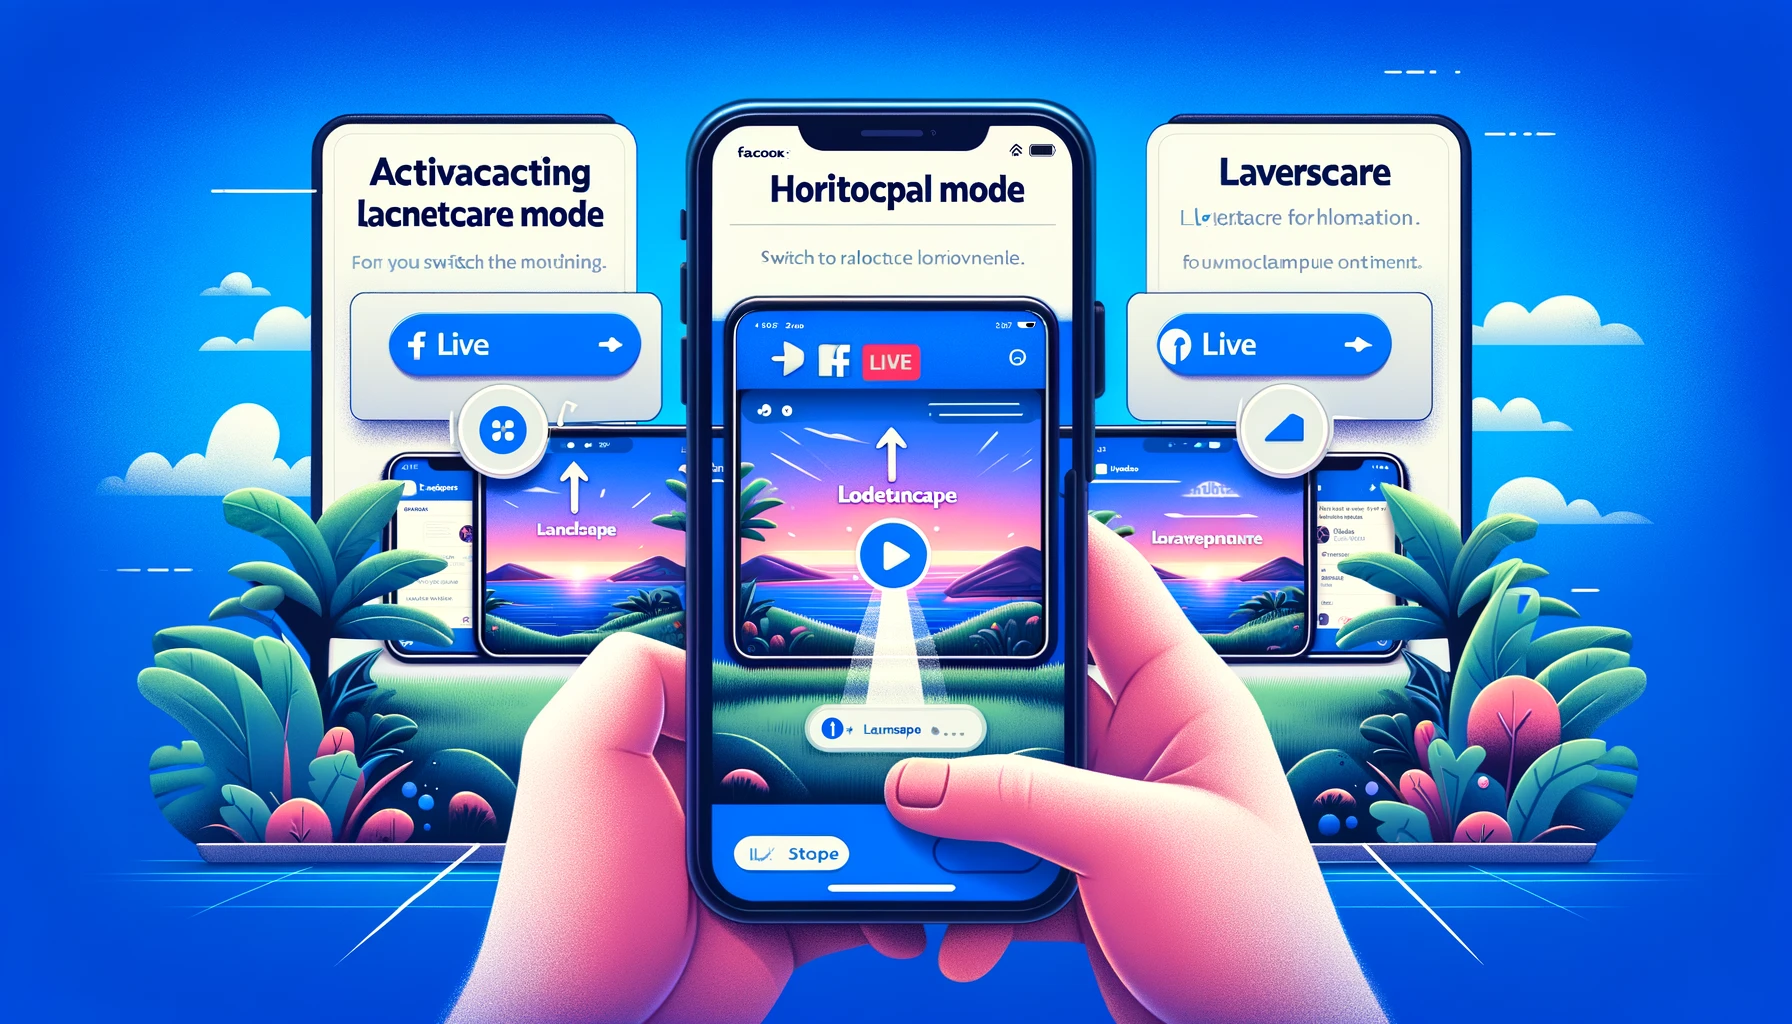 How to activate ‘horizontal mode’ on Facebook Live and stream in landscape?